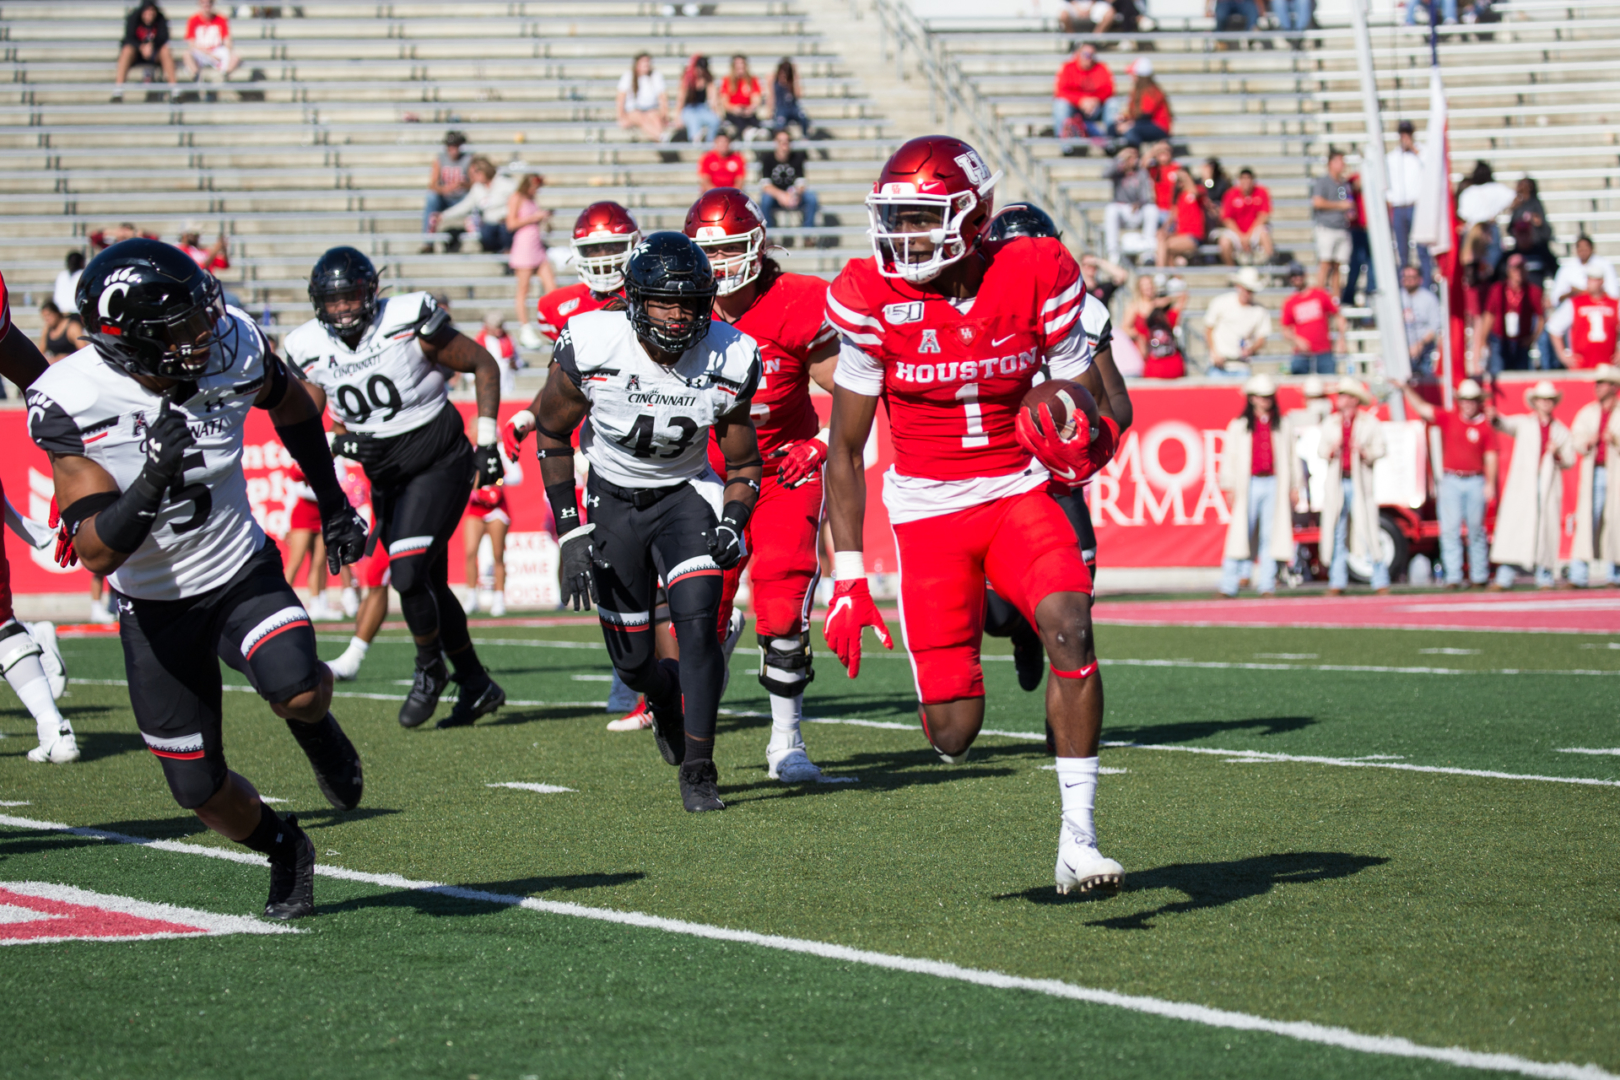 Houston receiver Bryson Smith is chased down by three different Cincinnati defenders during the 2019 season at TDECU Stadium. | Trevor Nolley/The Cougar